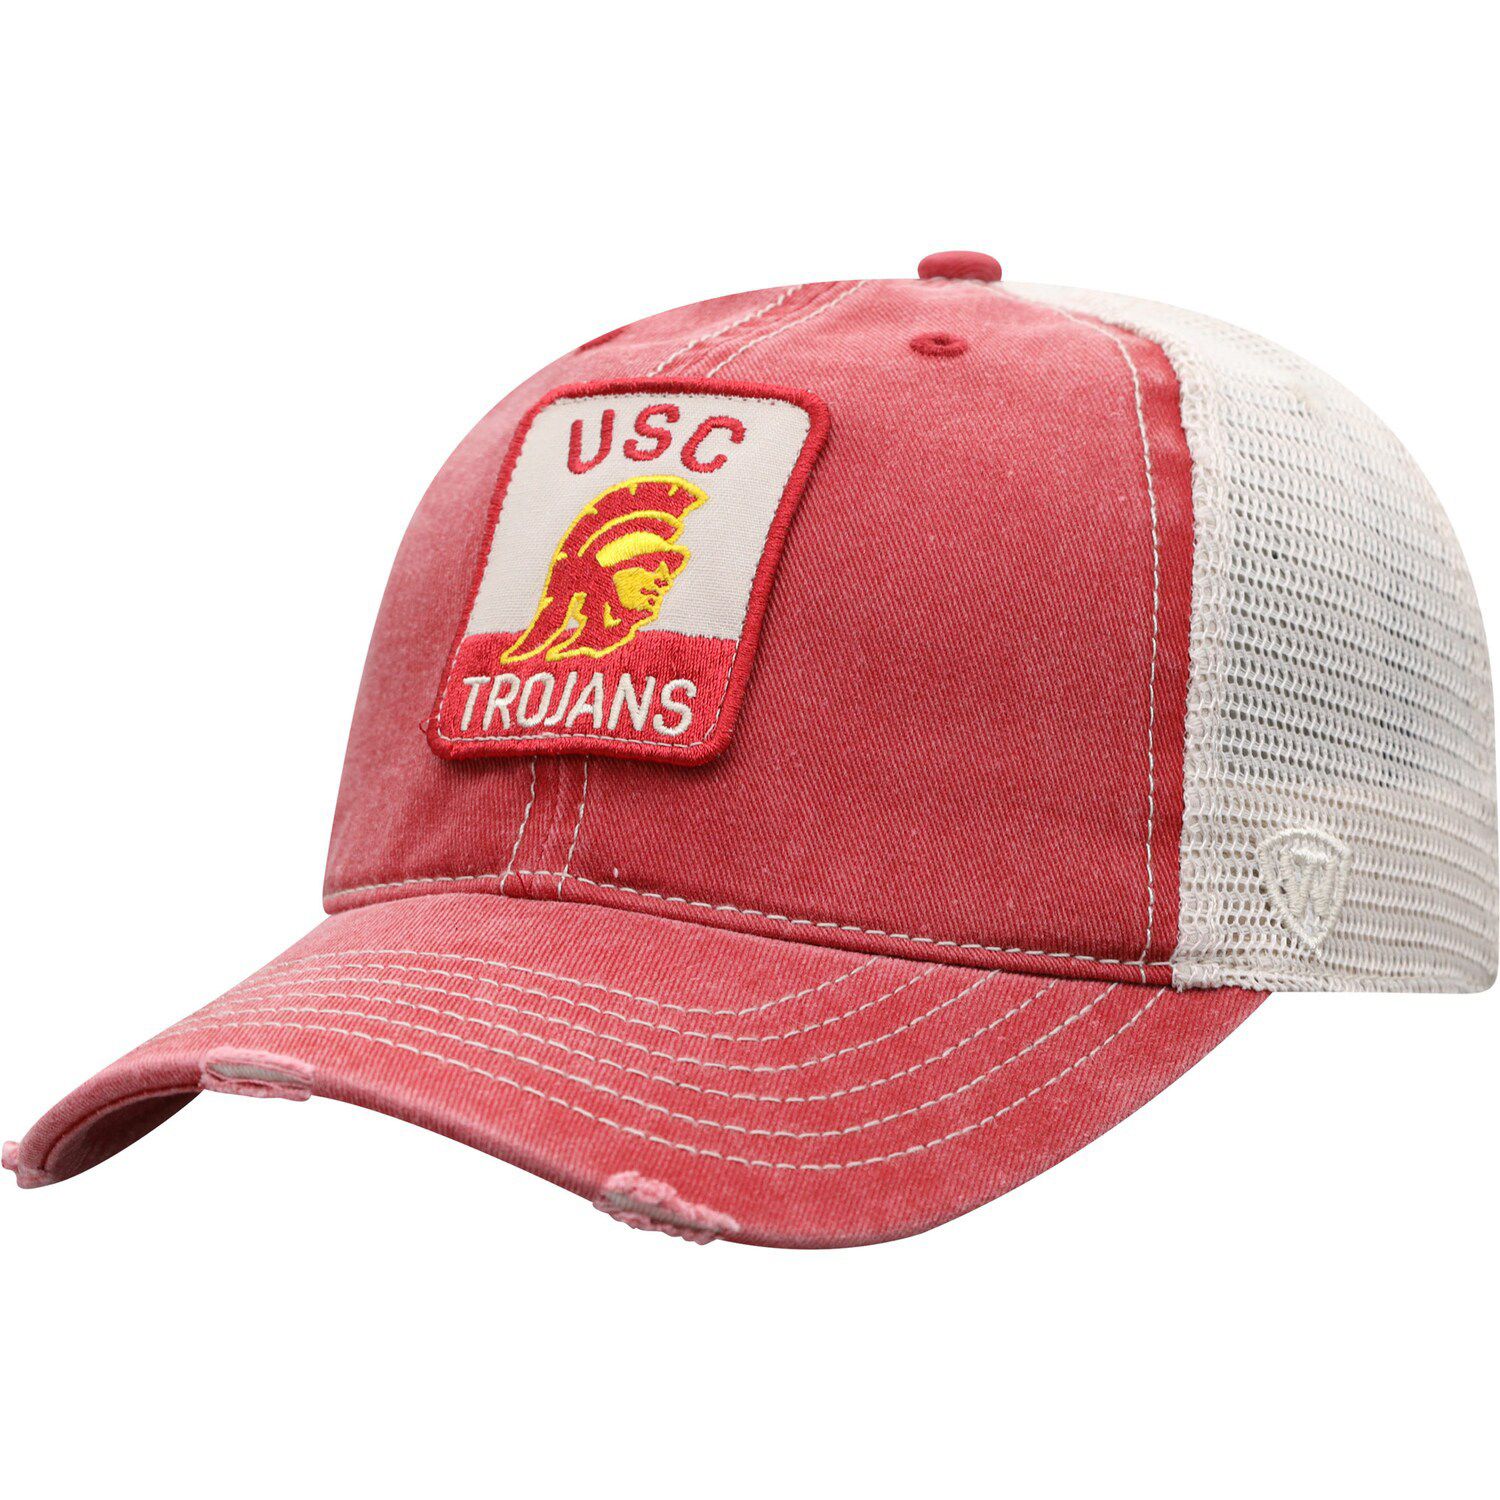 Image for Unbranded Men's Top of the World Cardinal/Natural USC Trojans Ol' Faithful Trucker Snapback Hat at Kohl's.